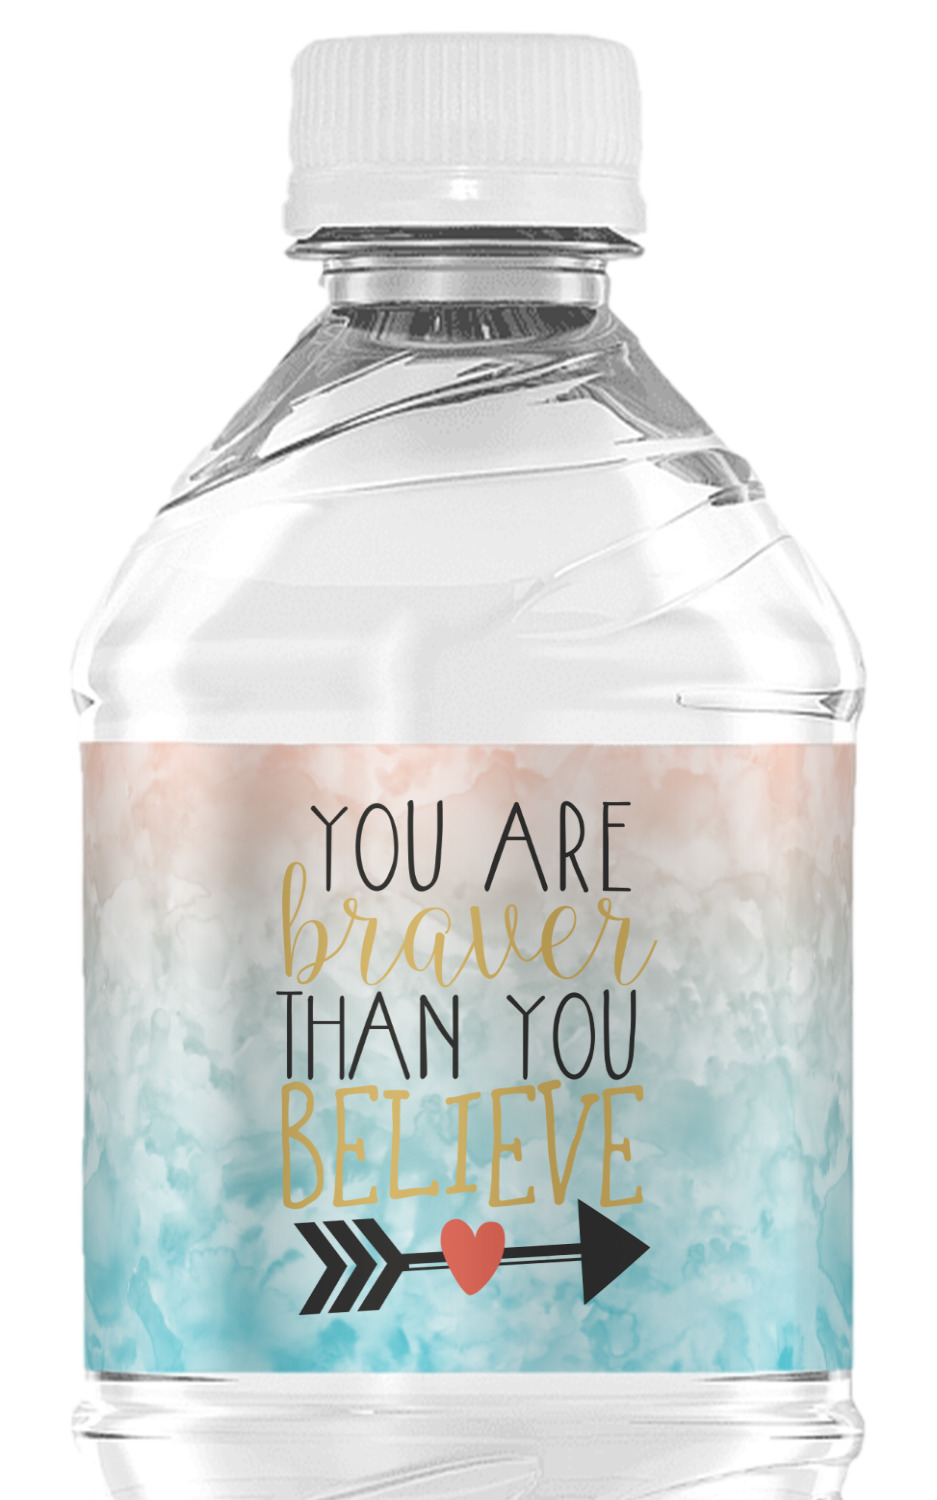 https://www.youcustomizeit.com/common/MAKE/1095102/Inspirational-Quotes-Water-Bottle-Label-Single-Front.jpg?lm=1667579445